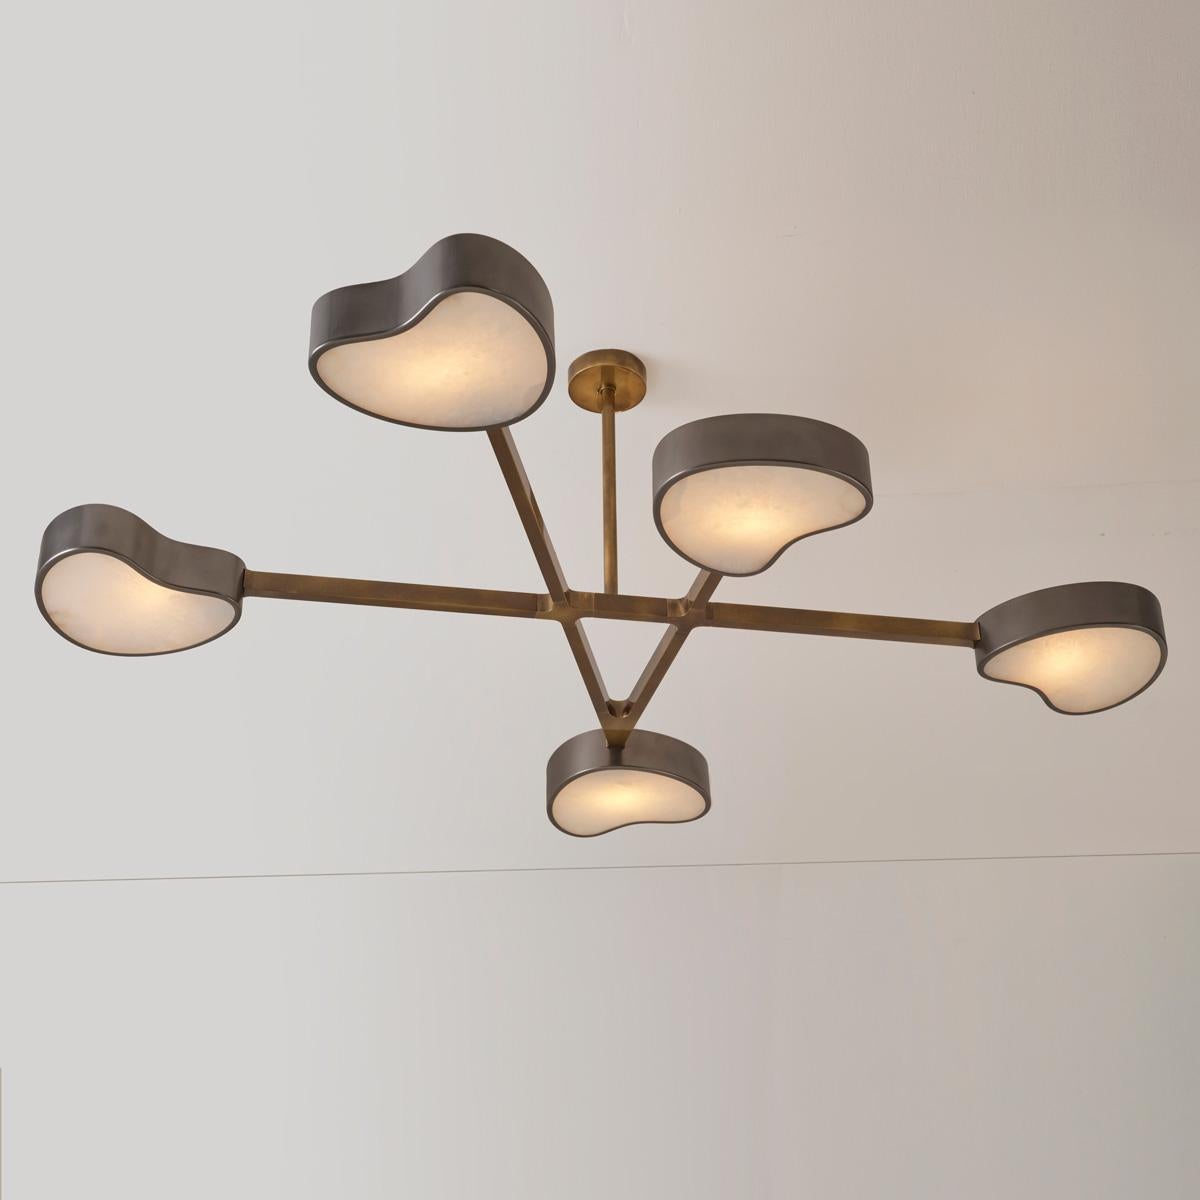 Cuore N.5 Ceiling Light by Gaspare Asaro. Satin Brass and Sand White Finish In New Condition For Sale In New York, NY